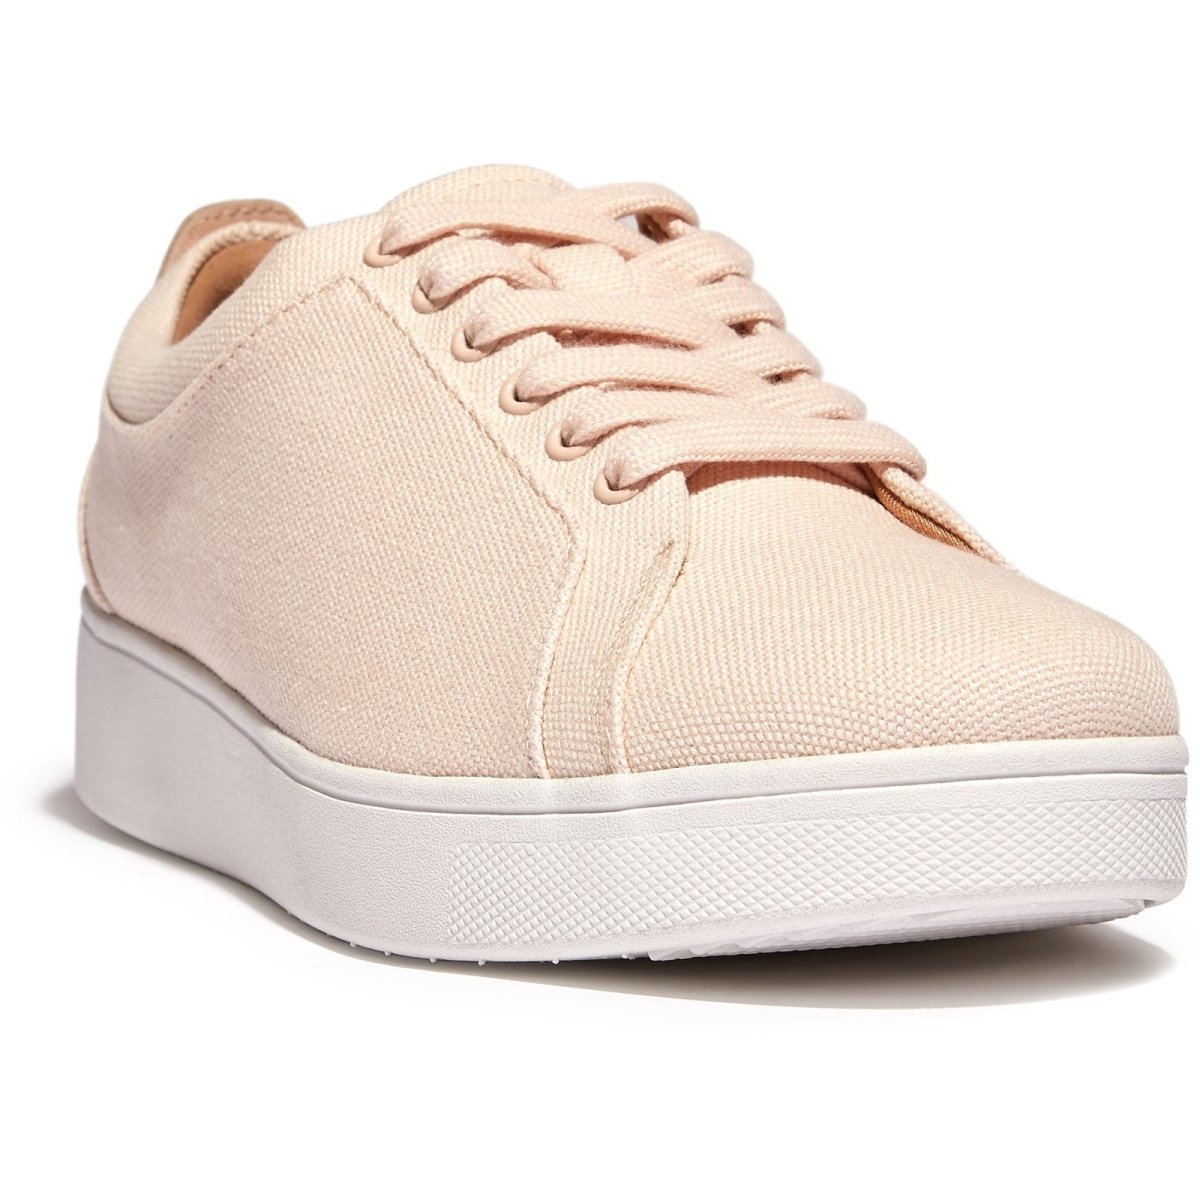 Fitflop Rally Canvas Ladies Trainer Sneakers - Shoe Store Direct